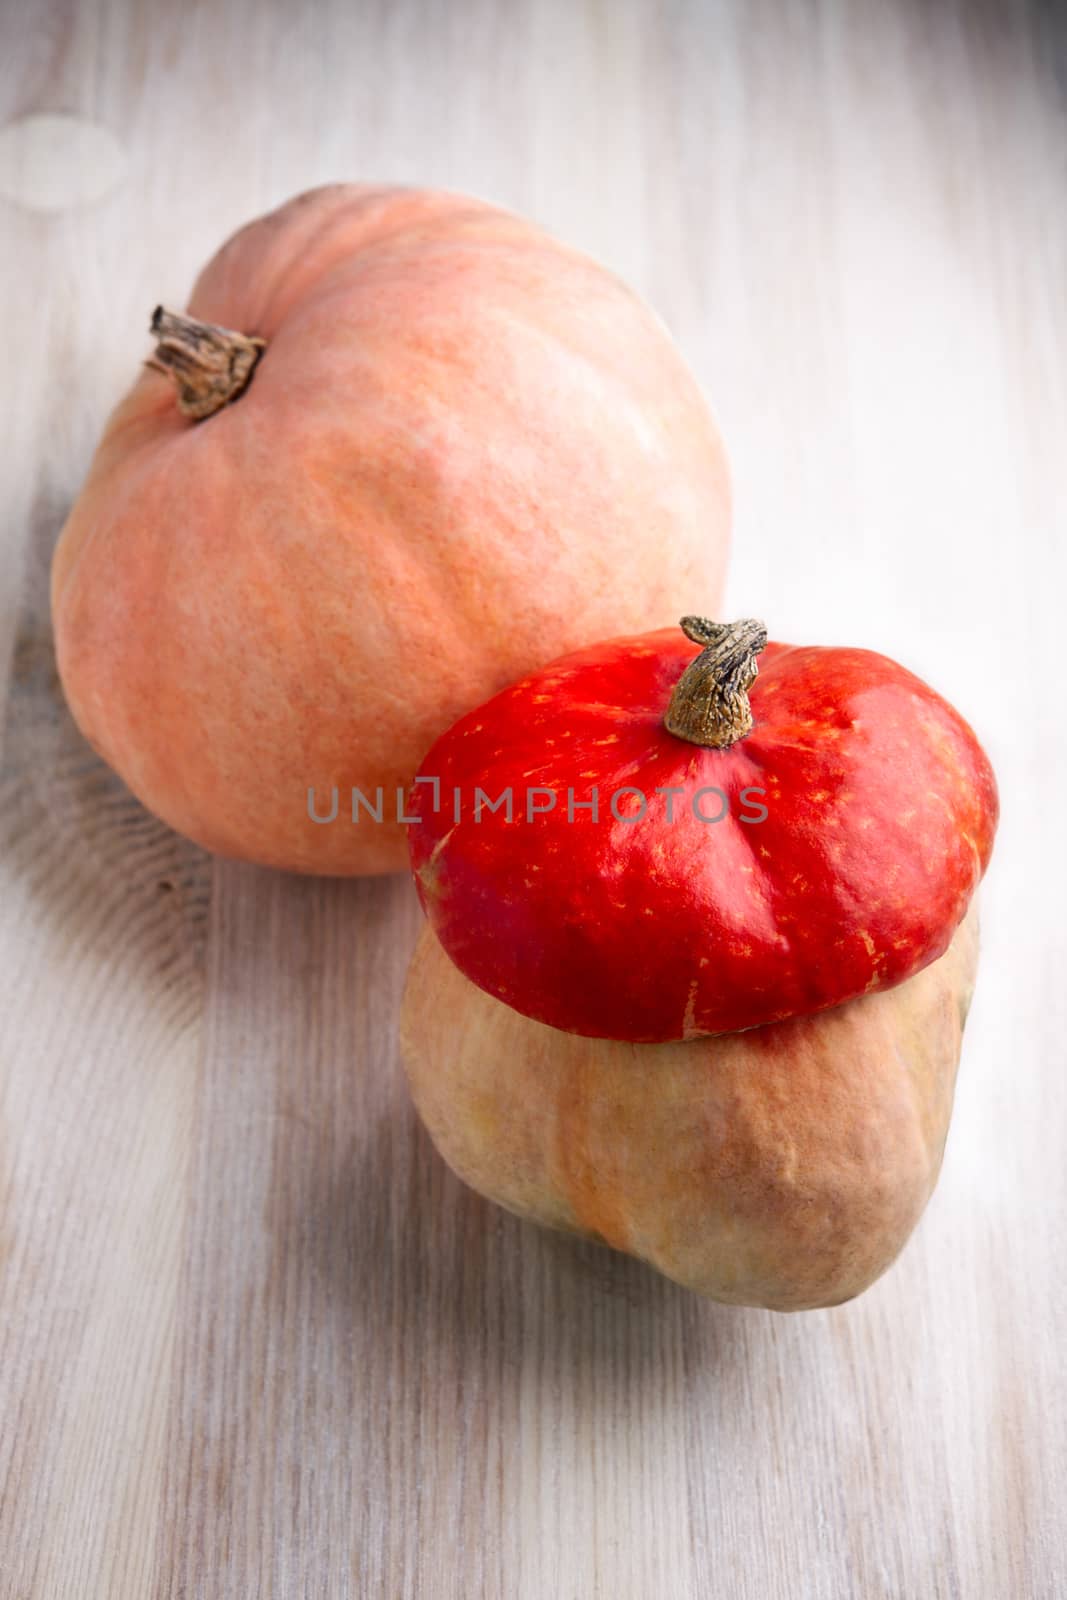 Pumpkin and turk's turban squash on wooden table